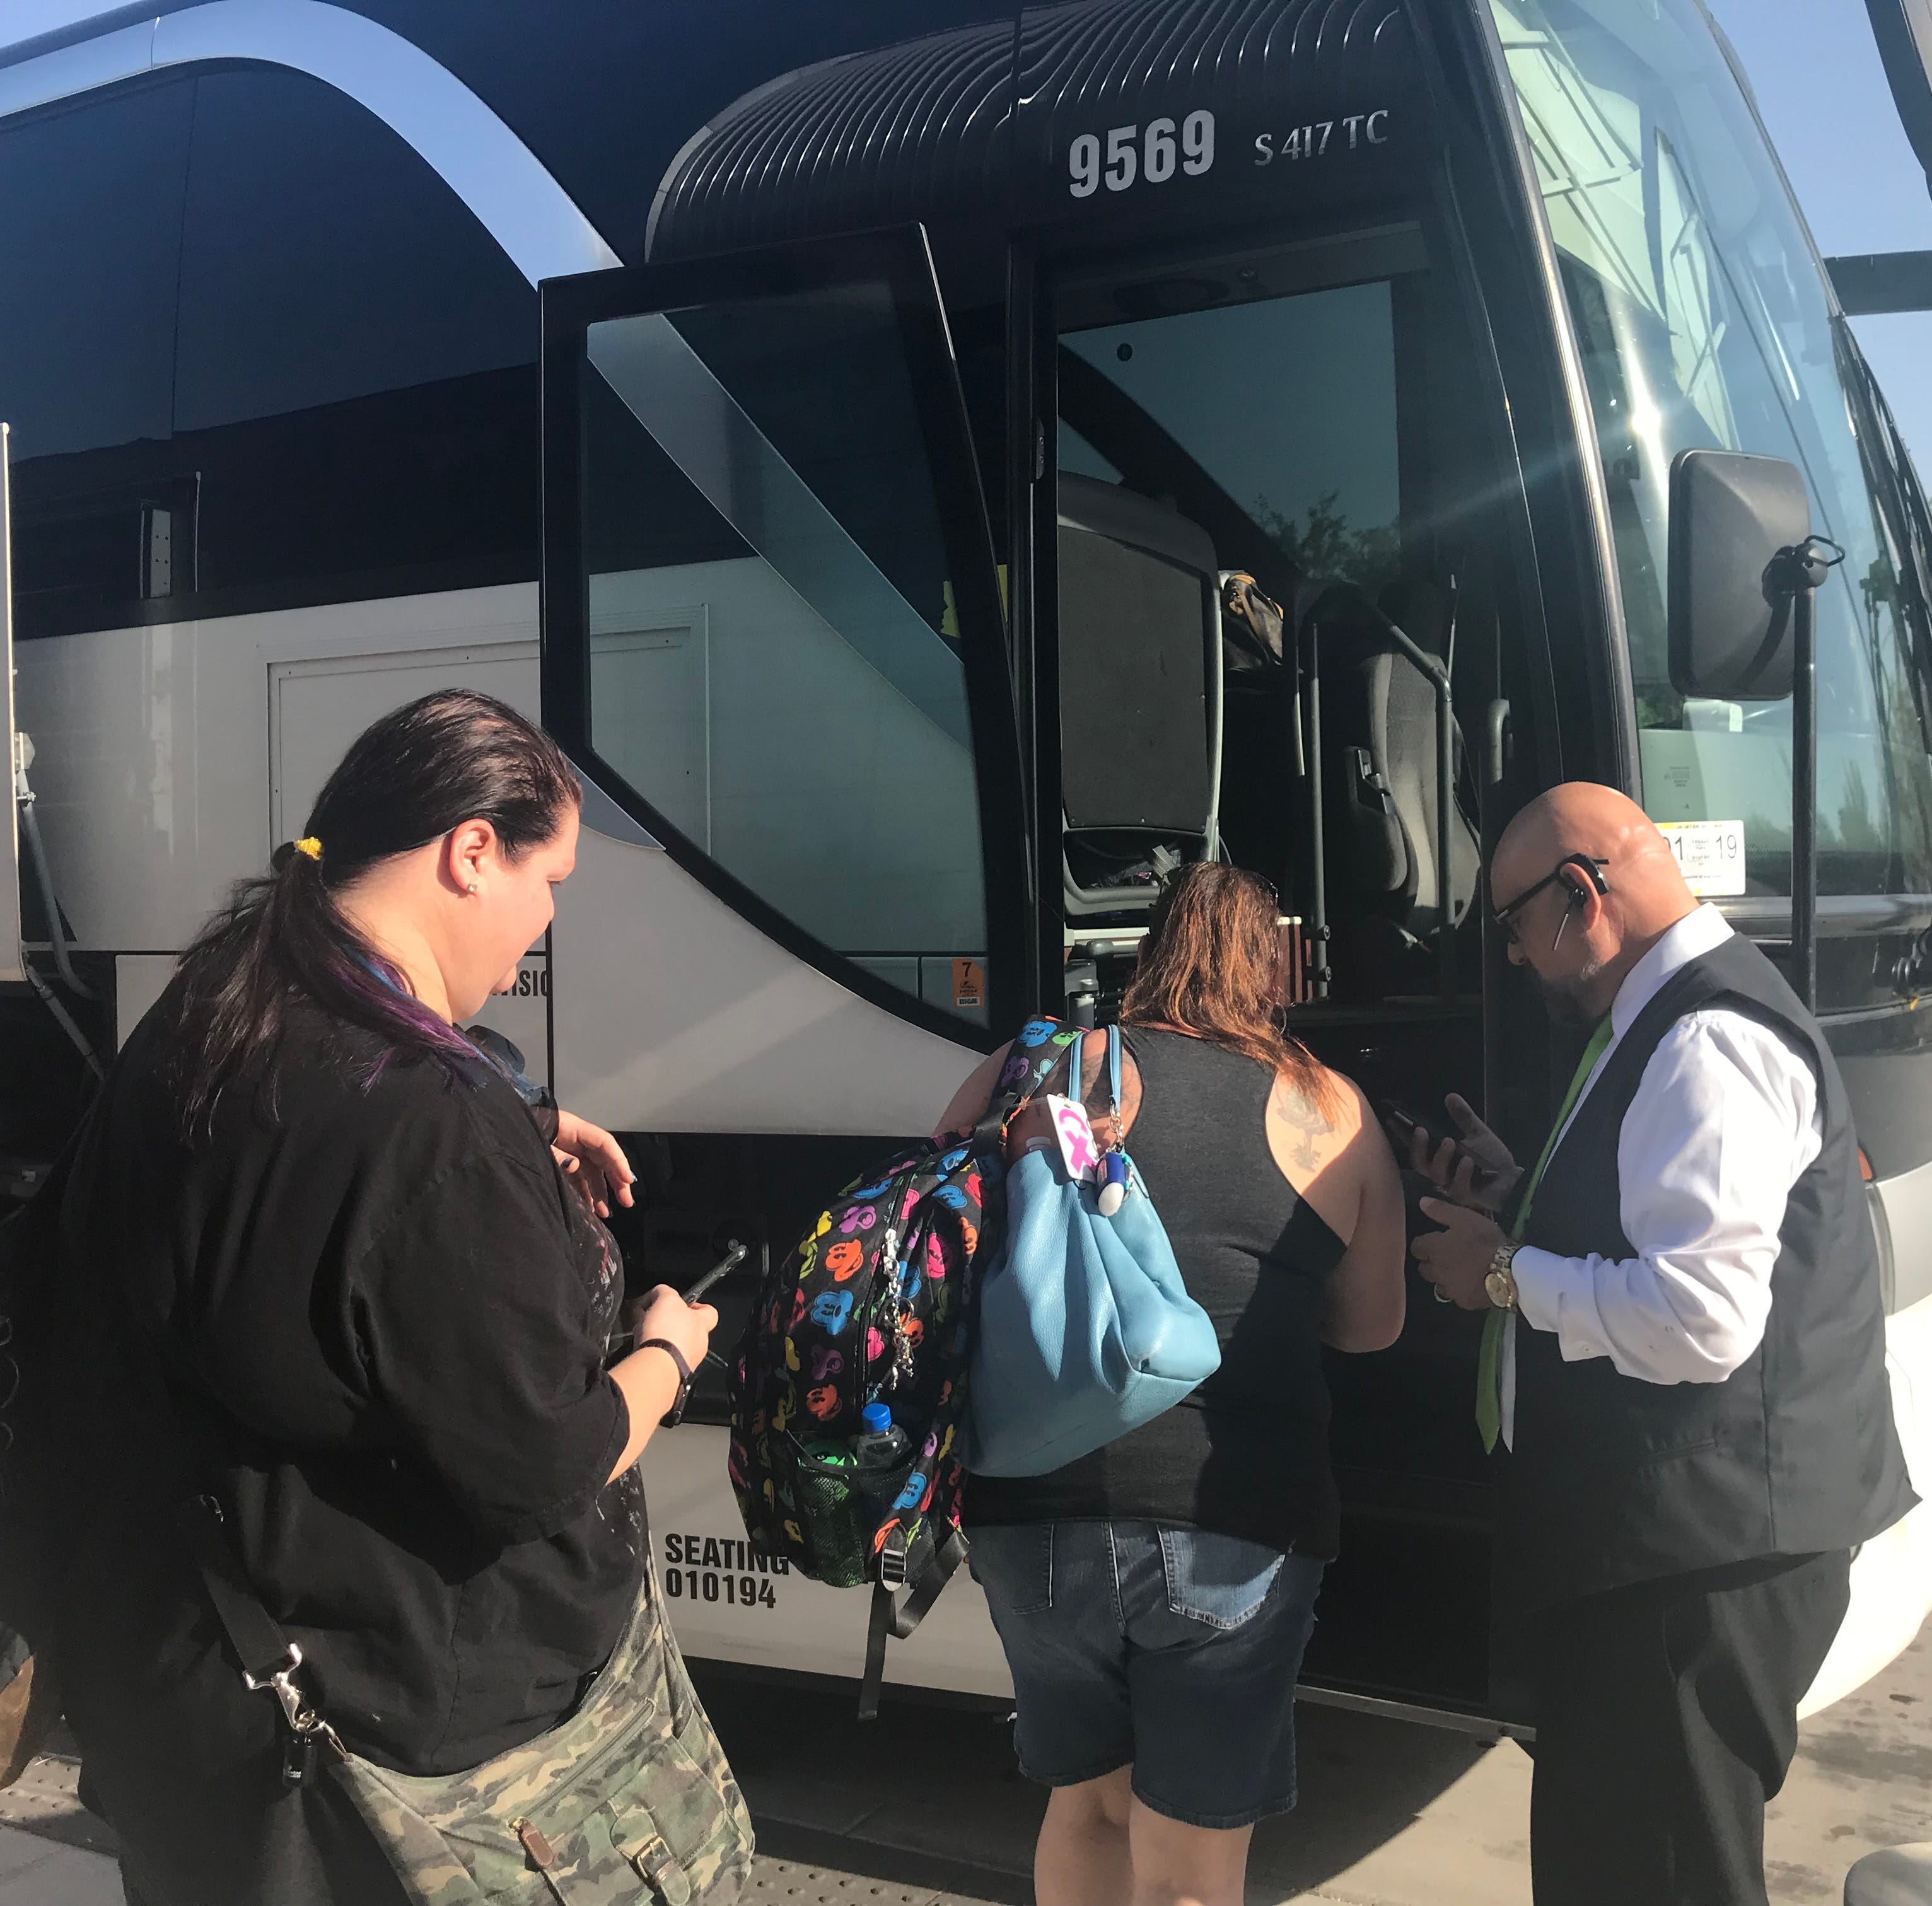 Passengers board a FlixBus at the Phoenix Sky Train Station near Phoenix Sky Harbor International Airport for a six-hour ride to Las Vegas. The buses are usually bright green but this was a last-minute substitution so the trip wasn't canceled.